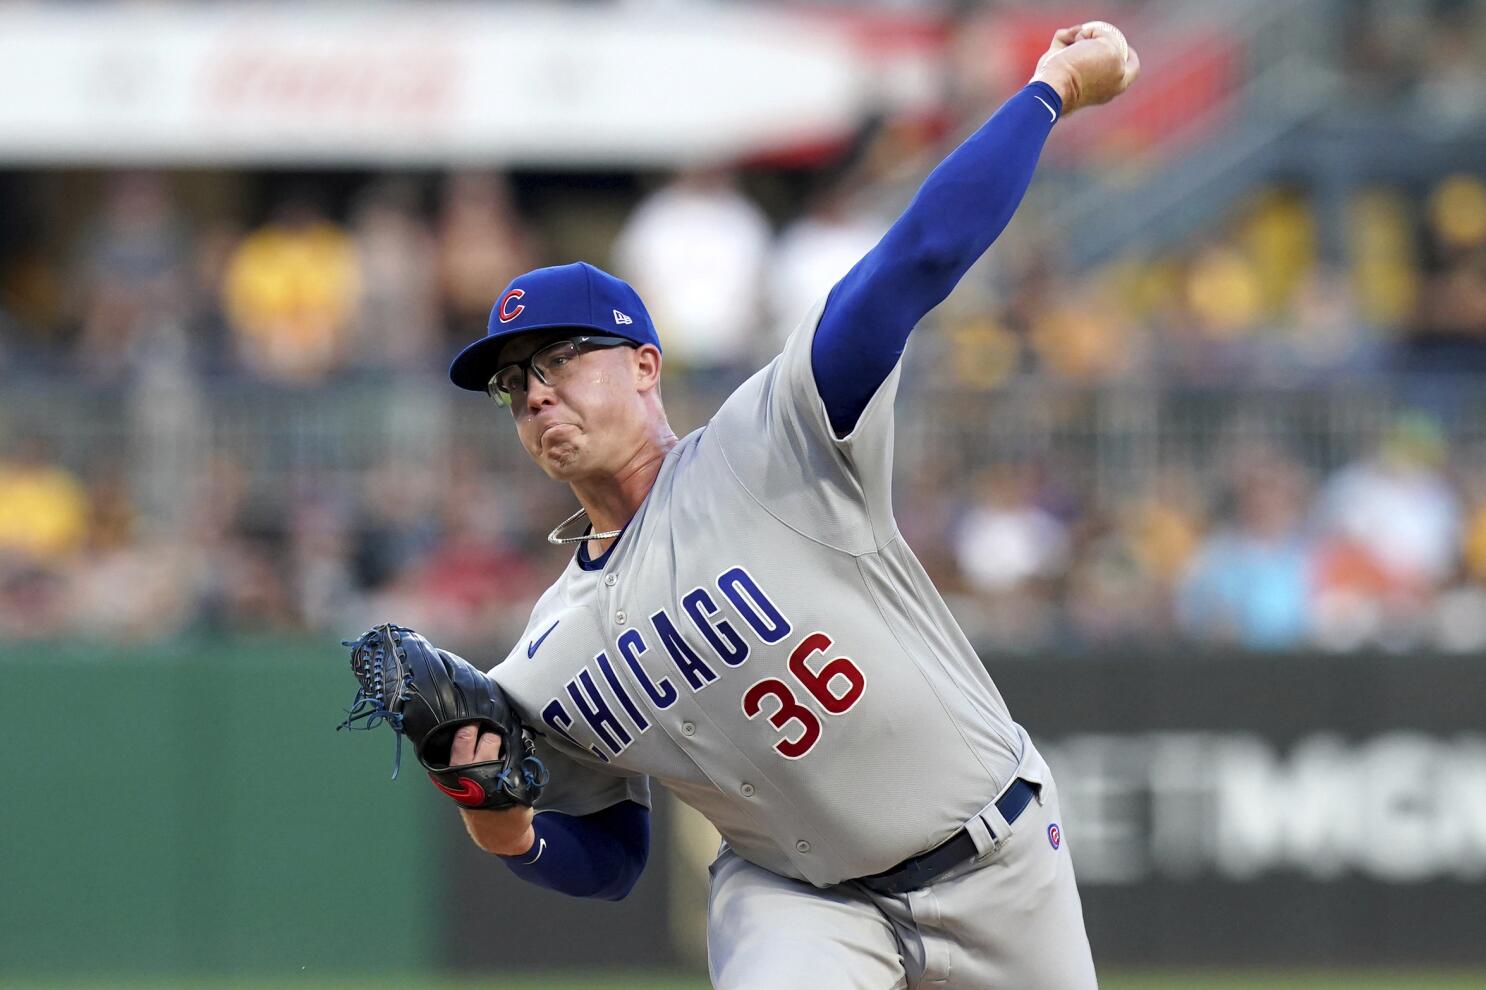 Ian Happ hits go-ahead single in 10th, Cubs move closer to NL Central lead  with 5-4 win over Pirates - The San Diego Union-Tribune